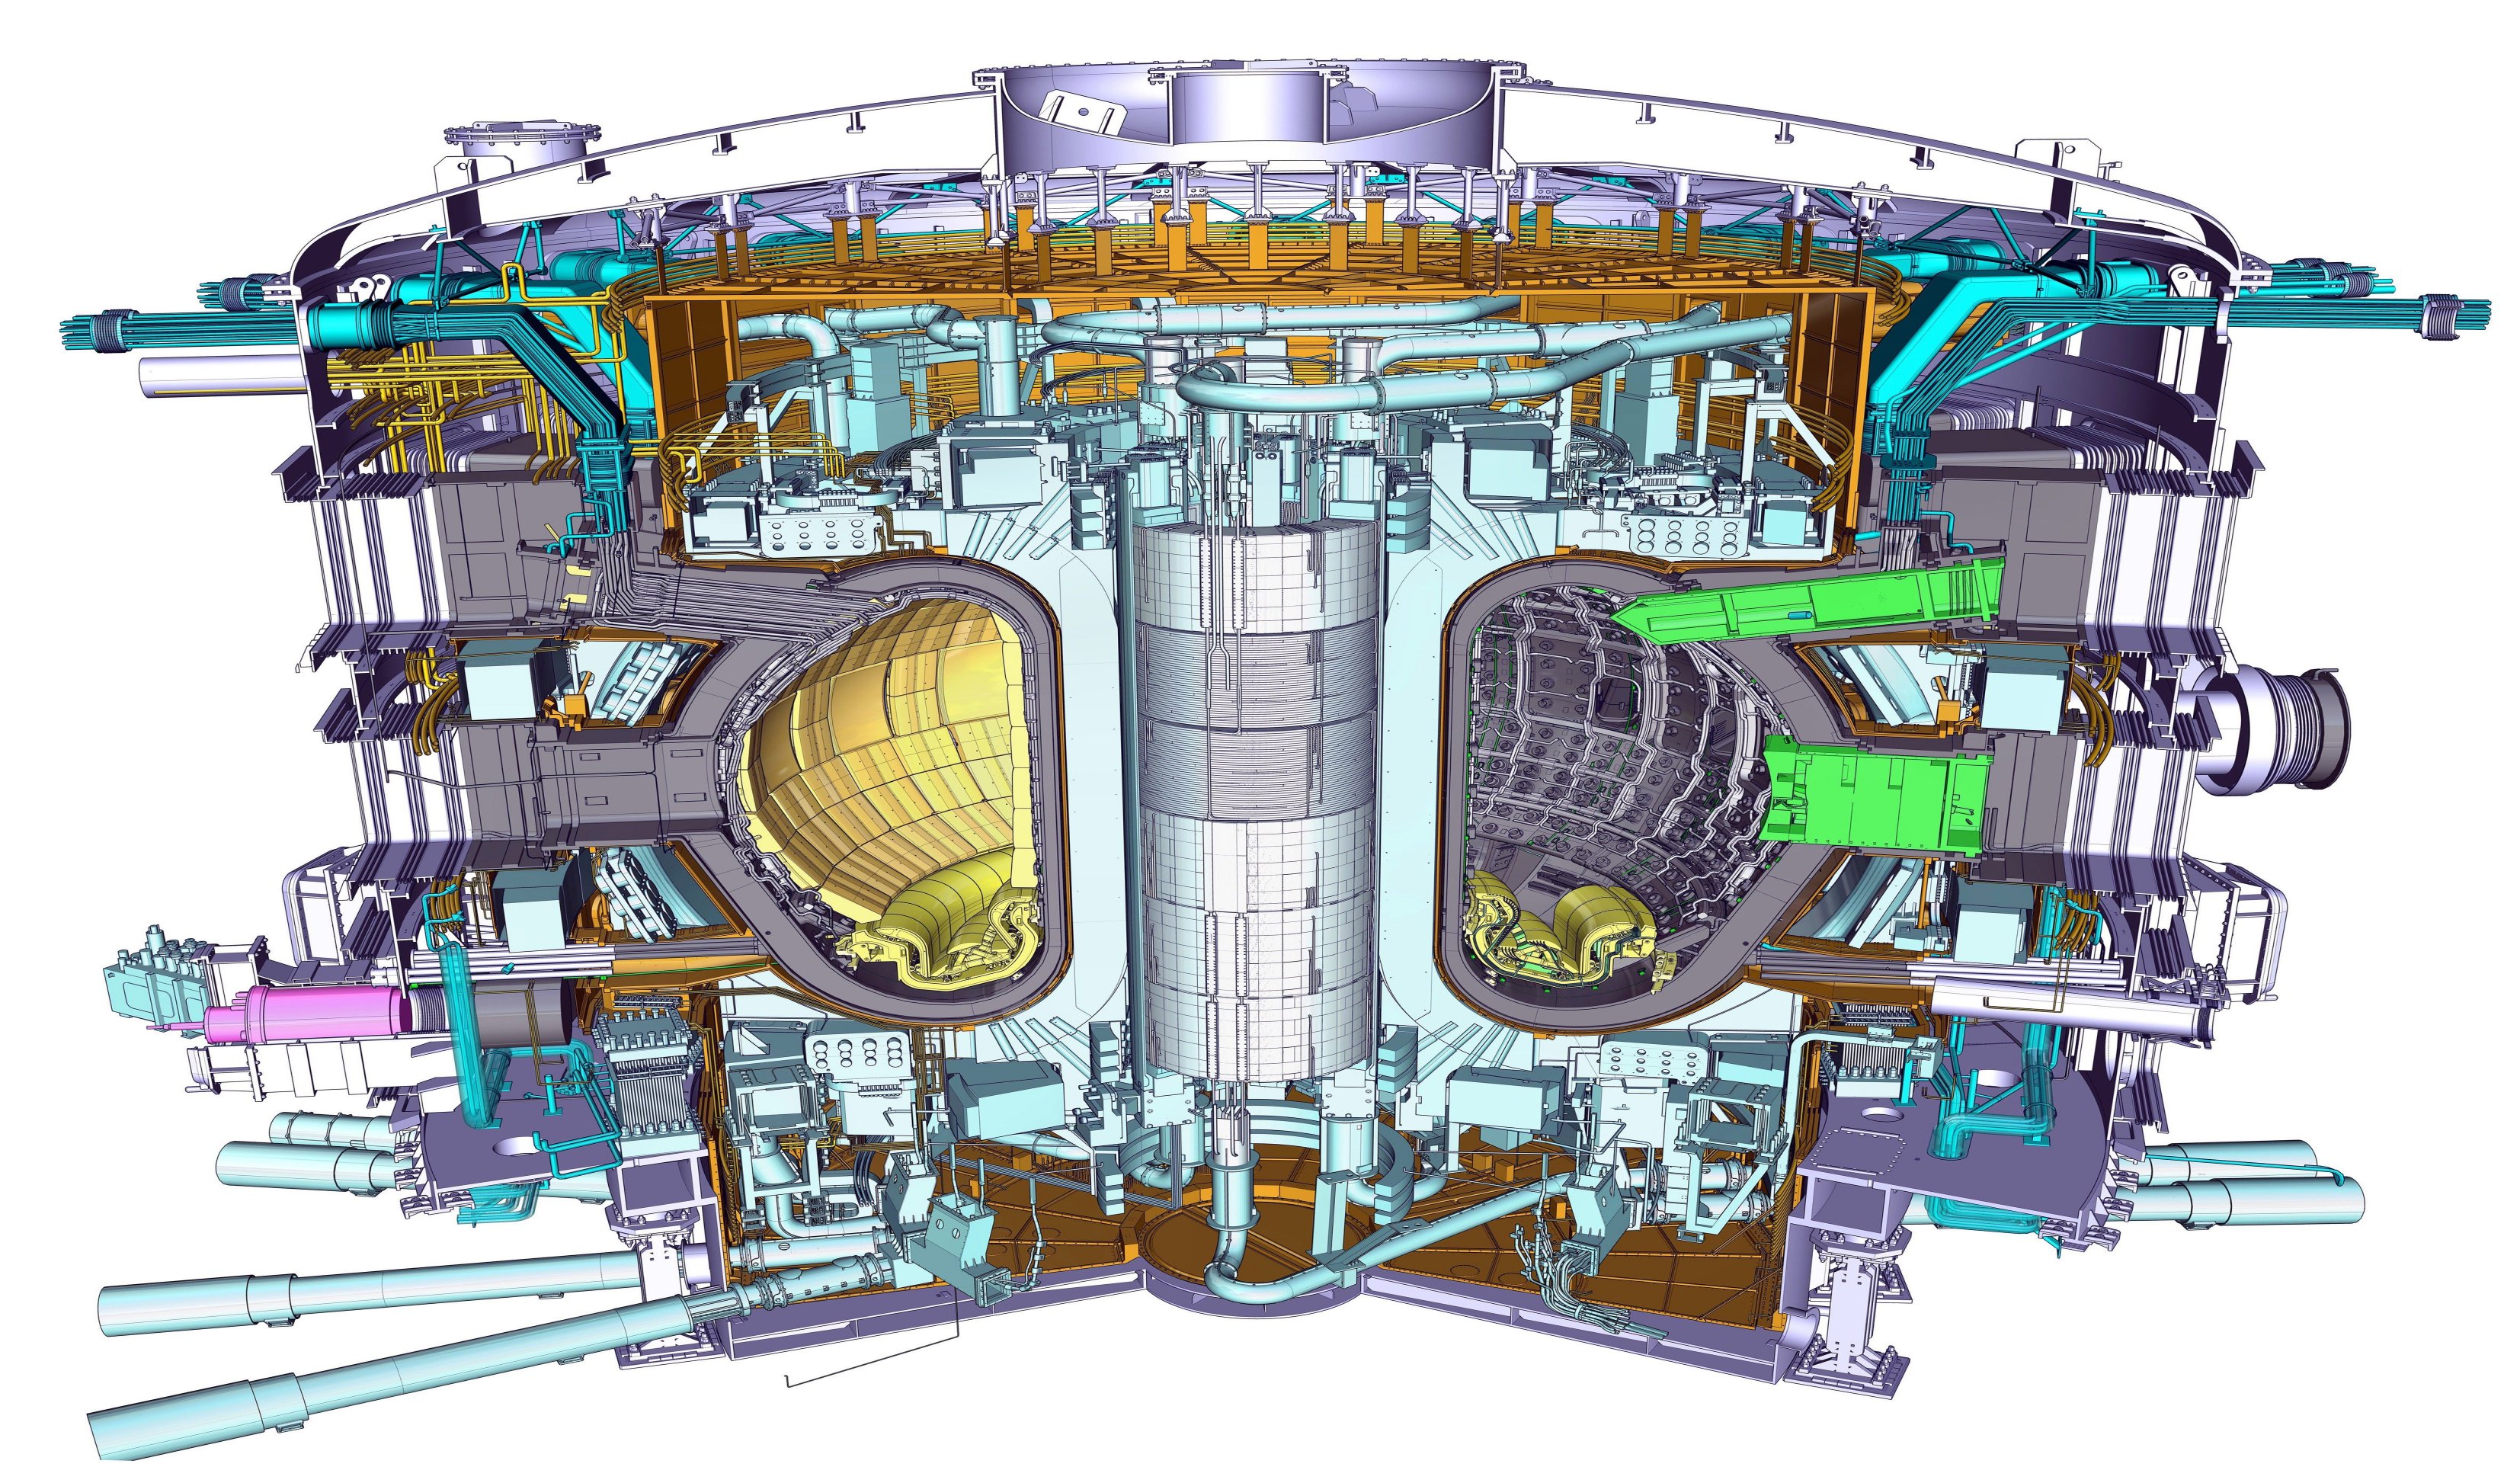 Most Expensive Piece of (Grounded) Scientific Equipment: ITER International Thermonuclear Experimental Reactor.
Price: $6,500,000,000.